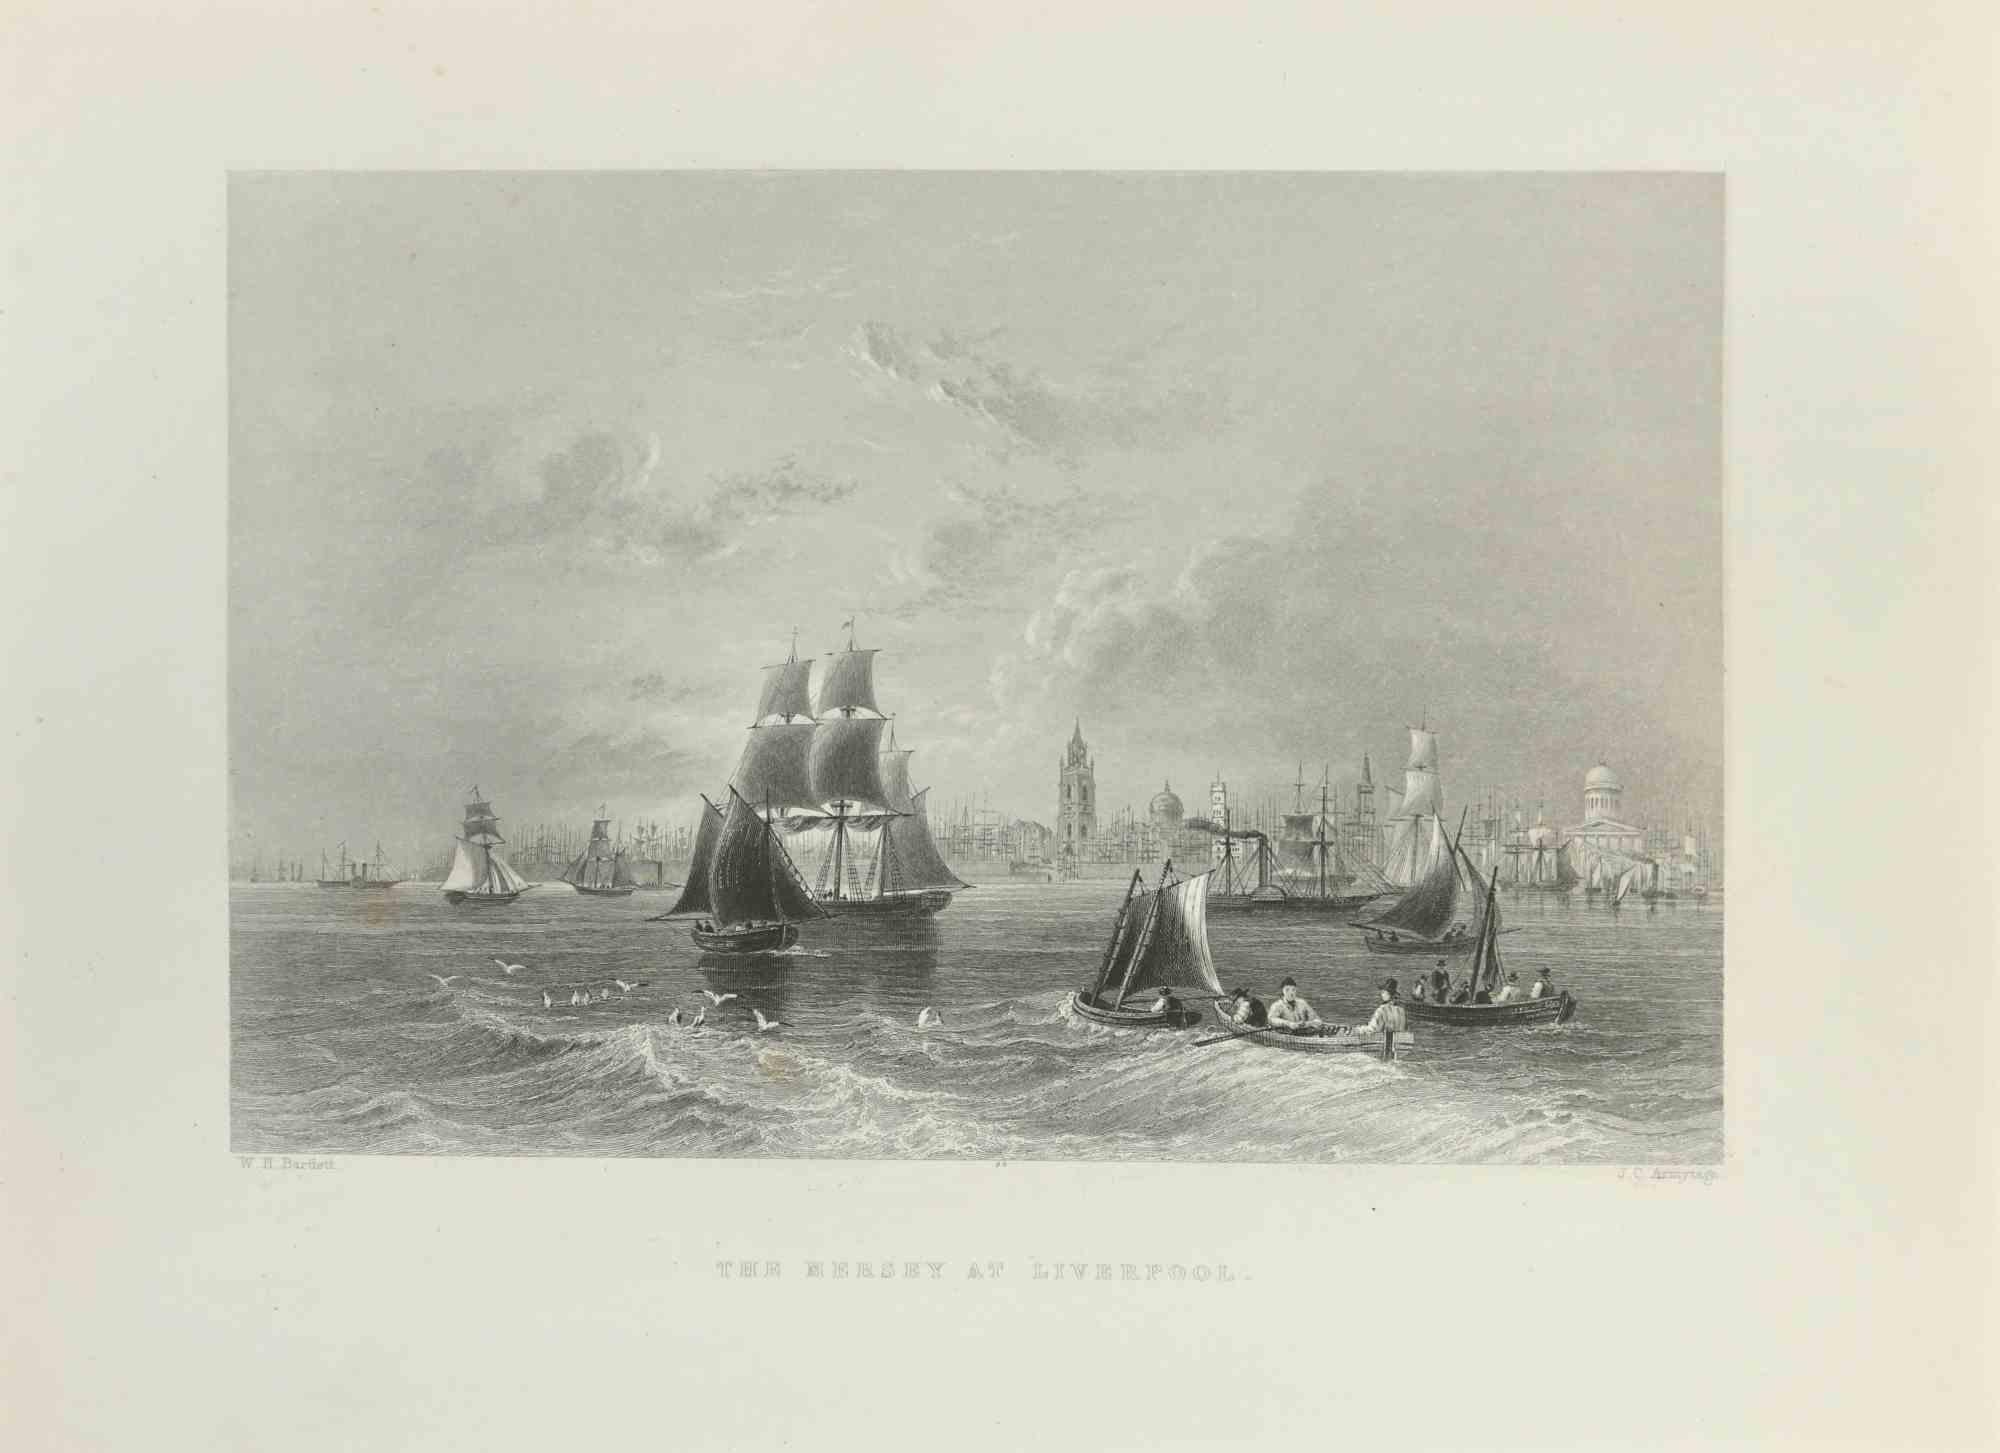 The Mersey at Liverpool is an etching realized in 1845 by J.C.Armytage.

Signed in plate.

The artwork is realized in a well-balanced composition.